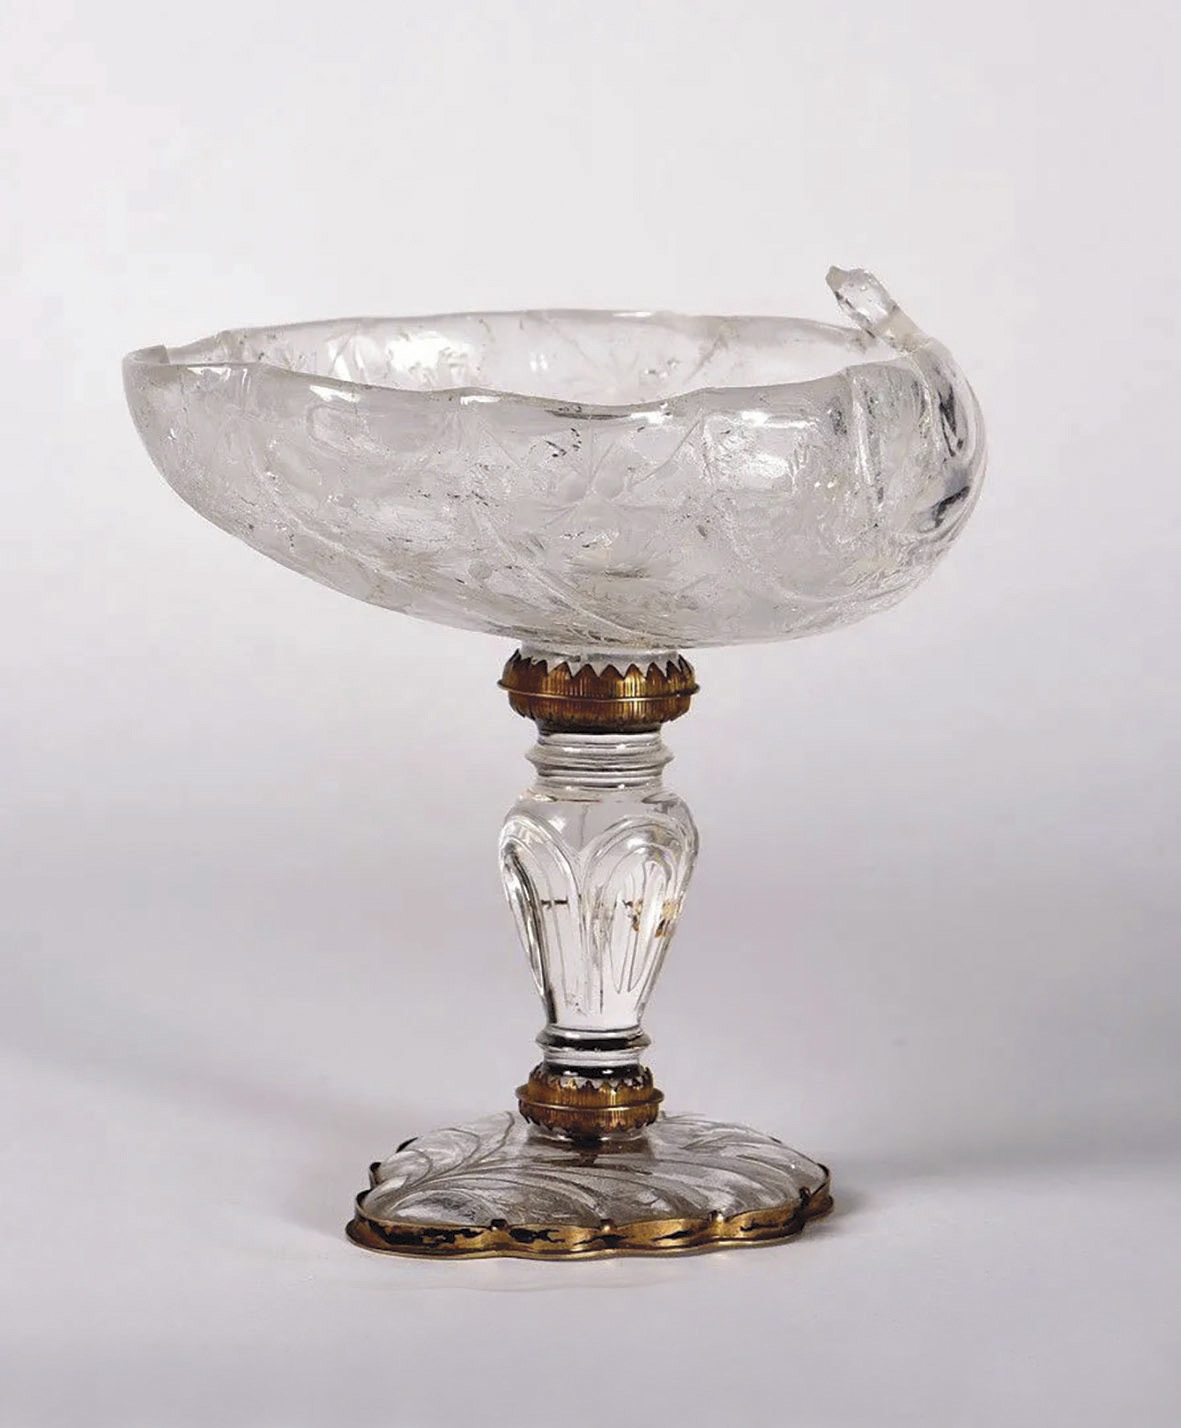 Milan, late 16th century. Shell-shaped "nef" vase (in the form of a ship), rock crystal and silver gilt, 16 x 15.5 x 14 cm/6.3 x 6.1 x 5.5 in. Estimate: €60,000/80,000